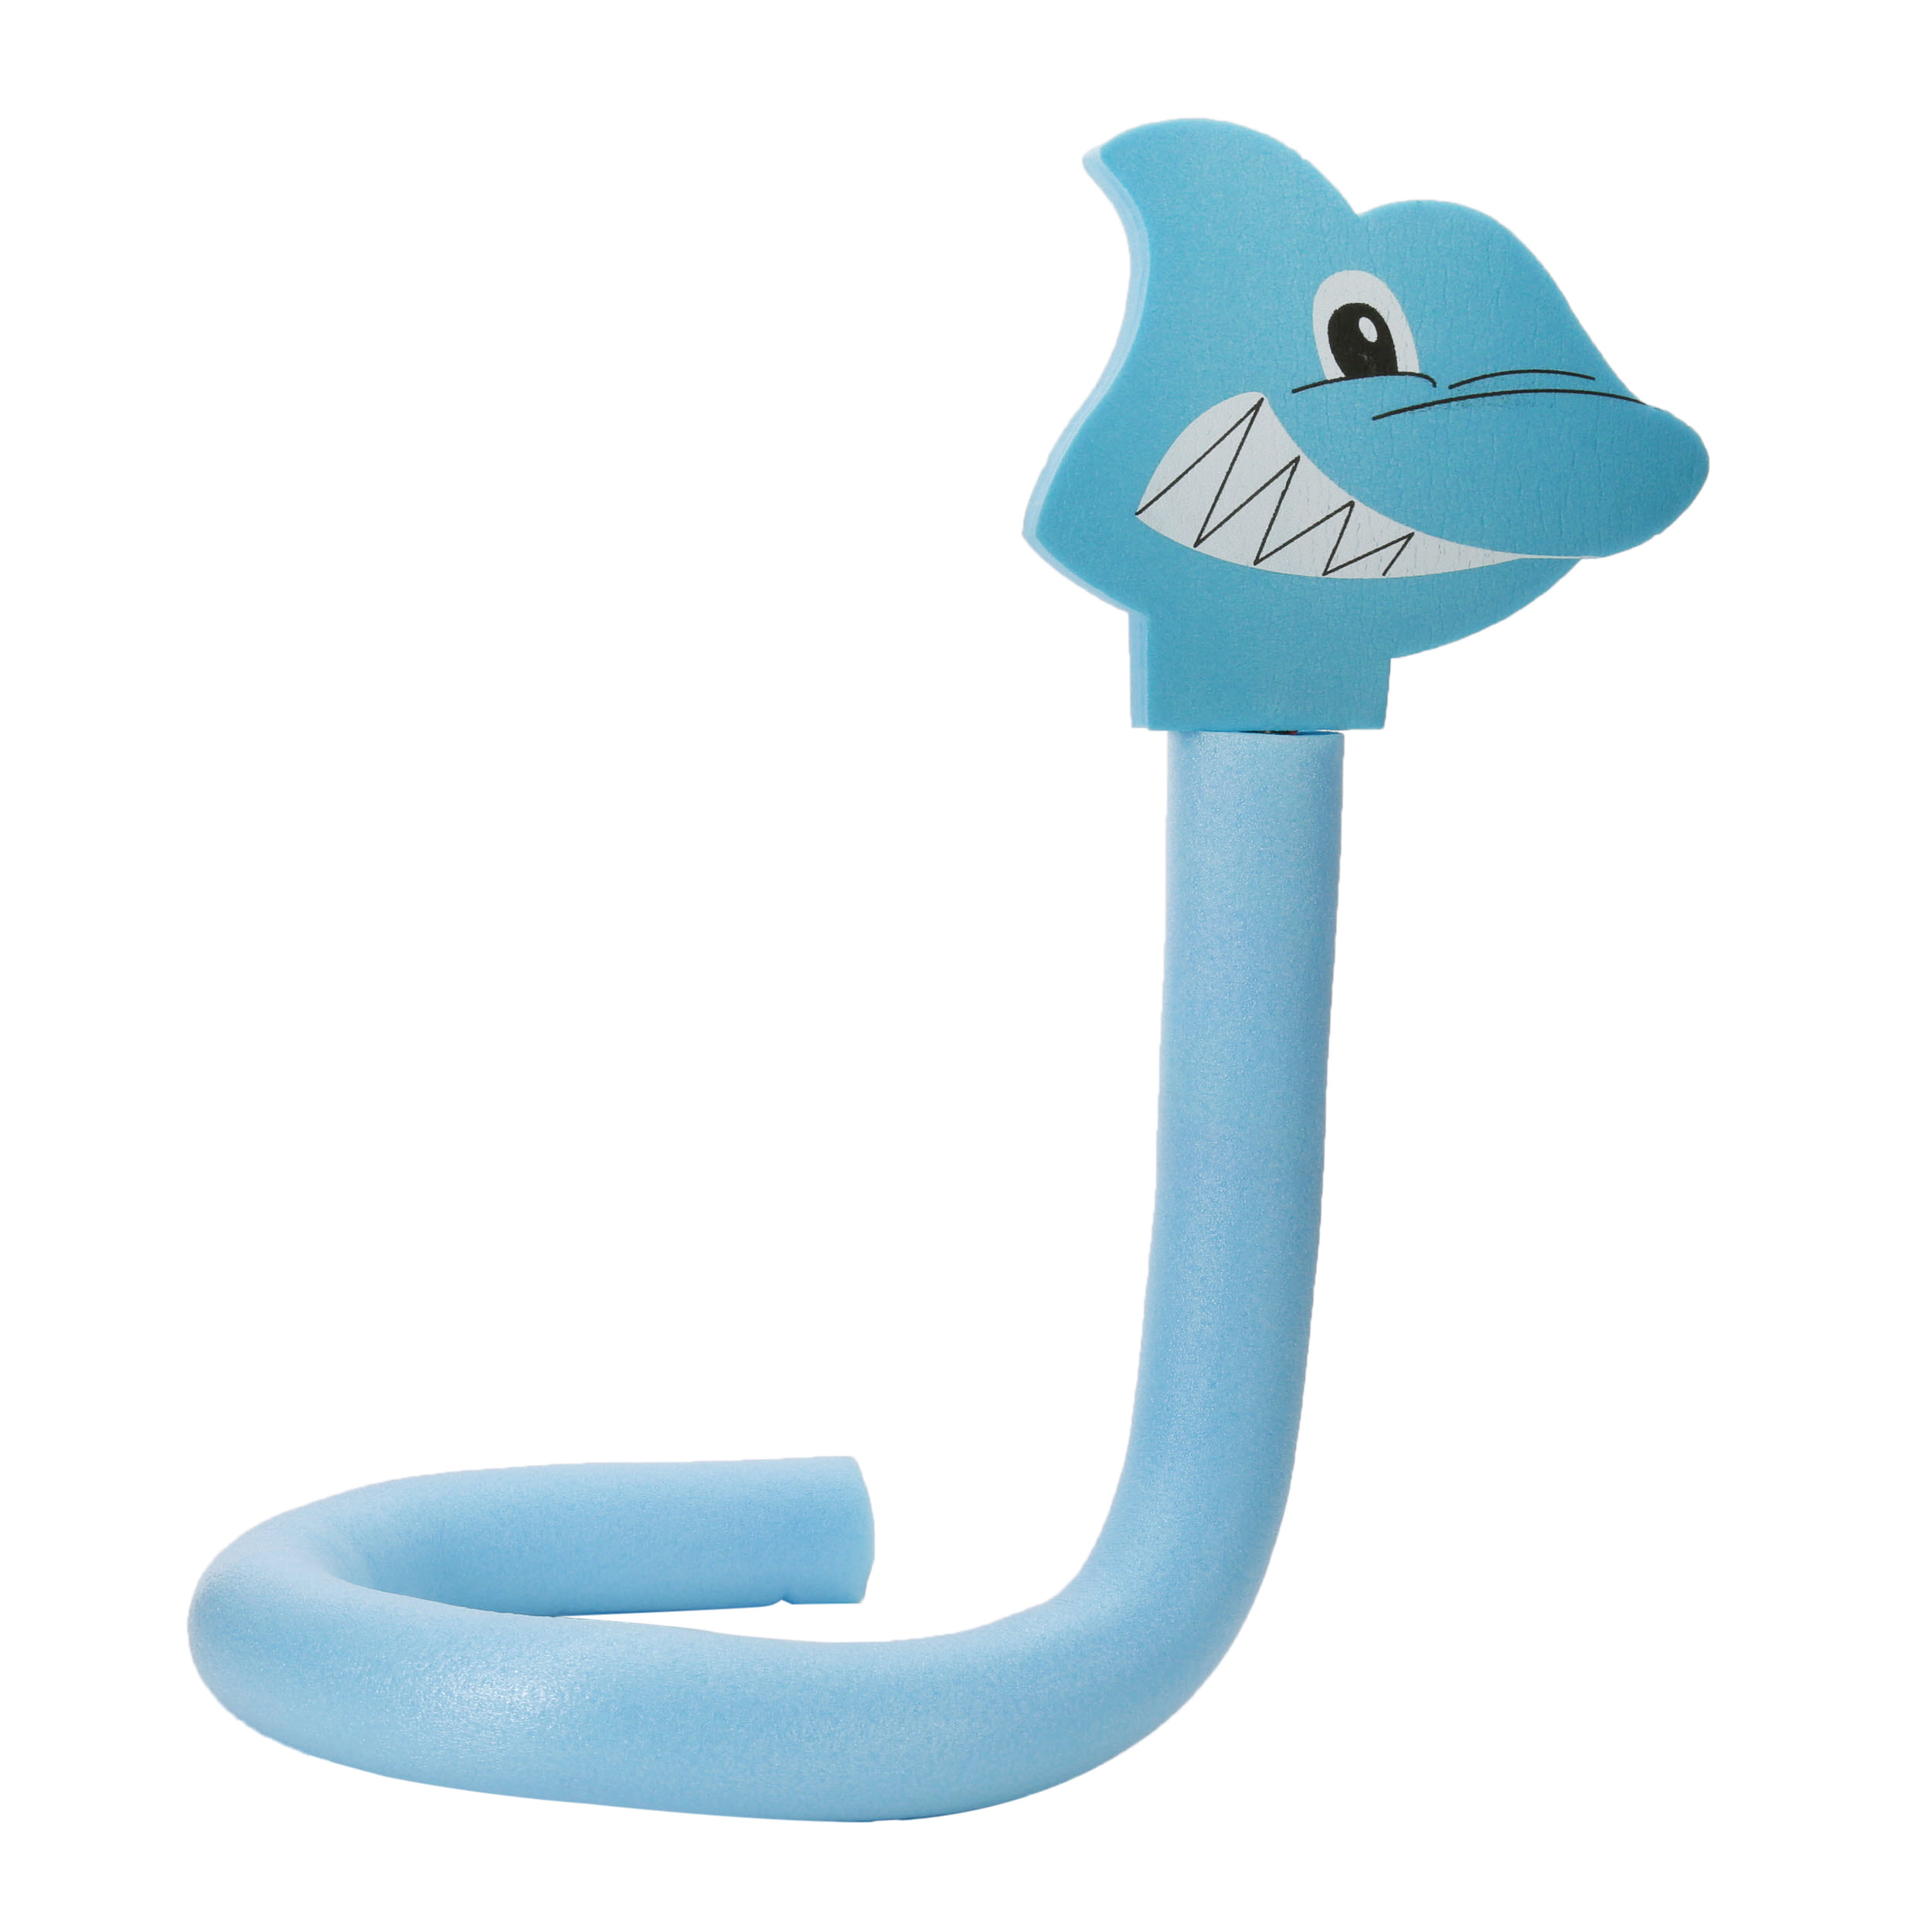 X1 Mermaid SEA LIFE SHARKS Inflatable Pool Noodle Fun Water Outdoors 80cm